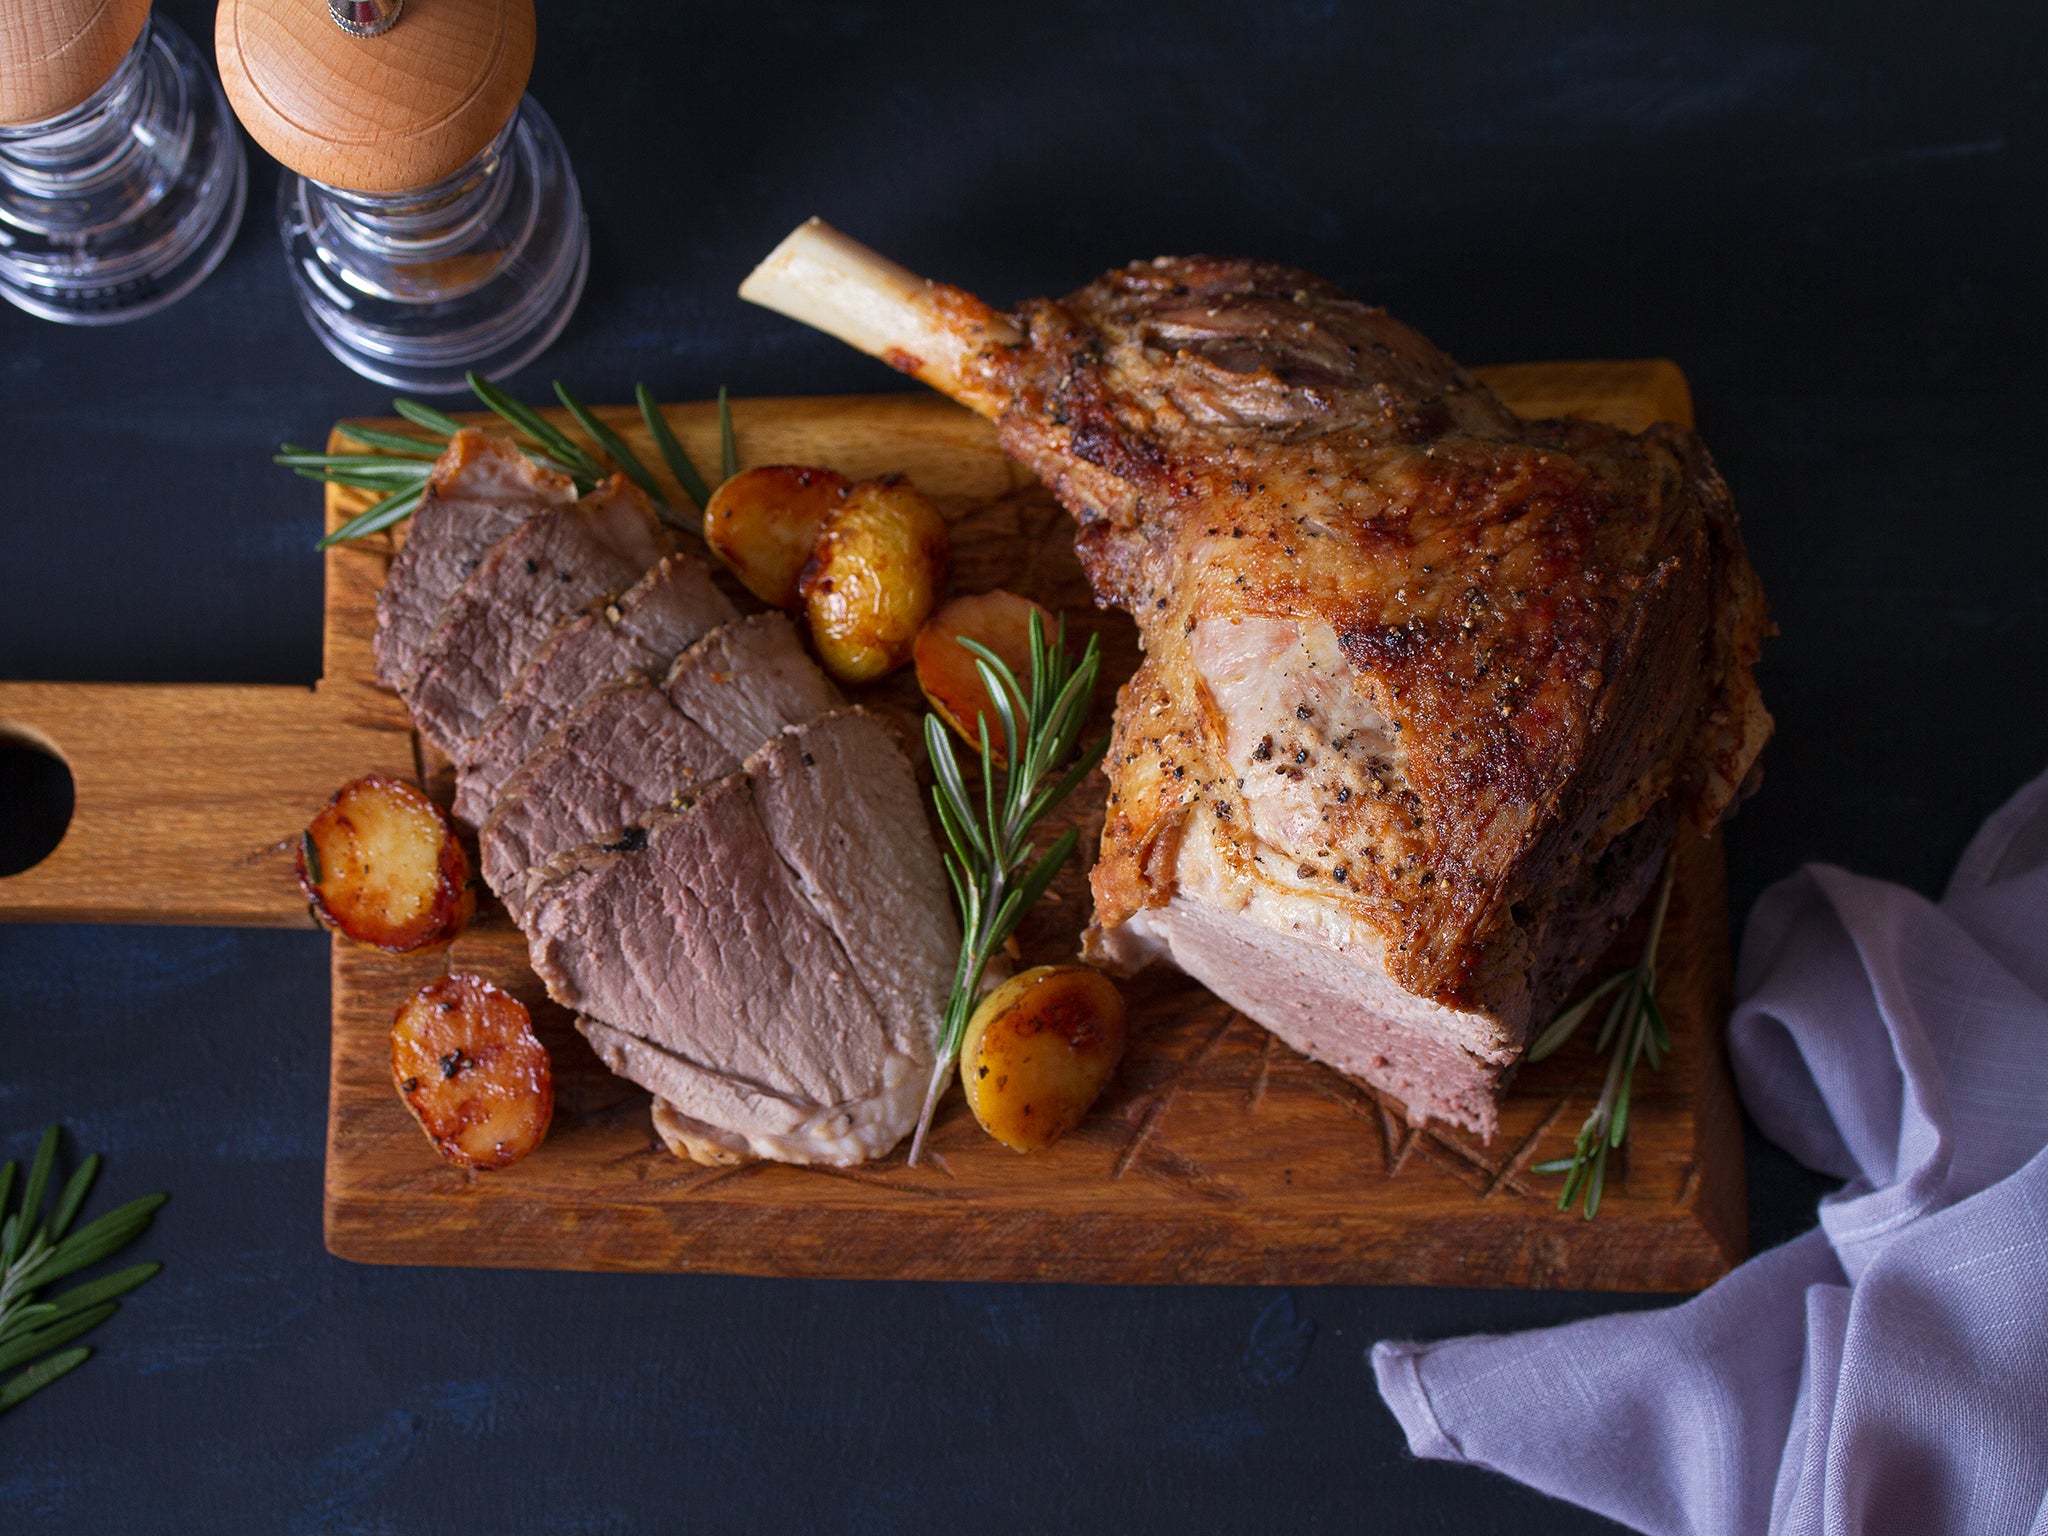 Roast lamb with potatoes is a traditional Christmas Day meal in Greece